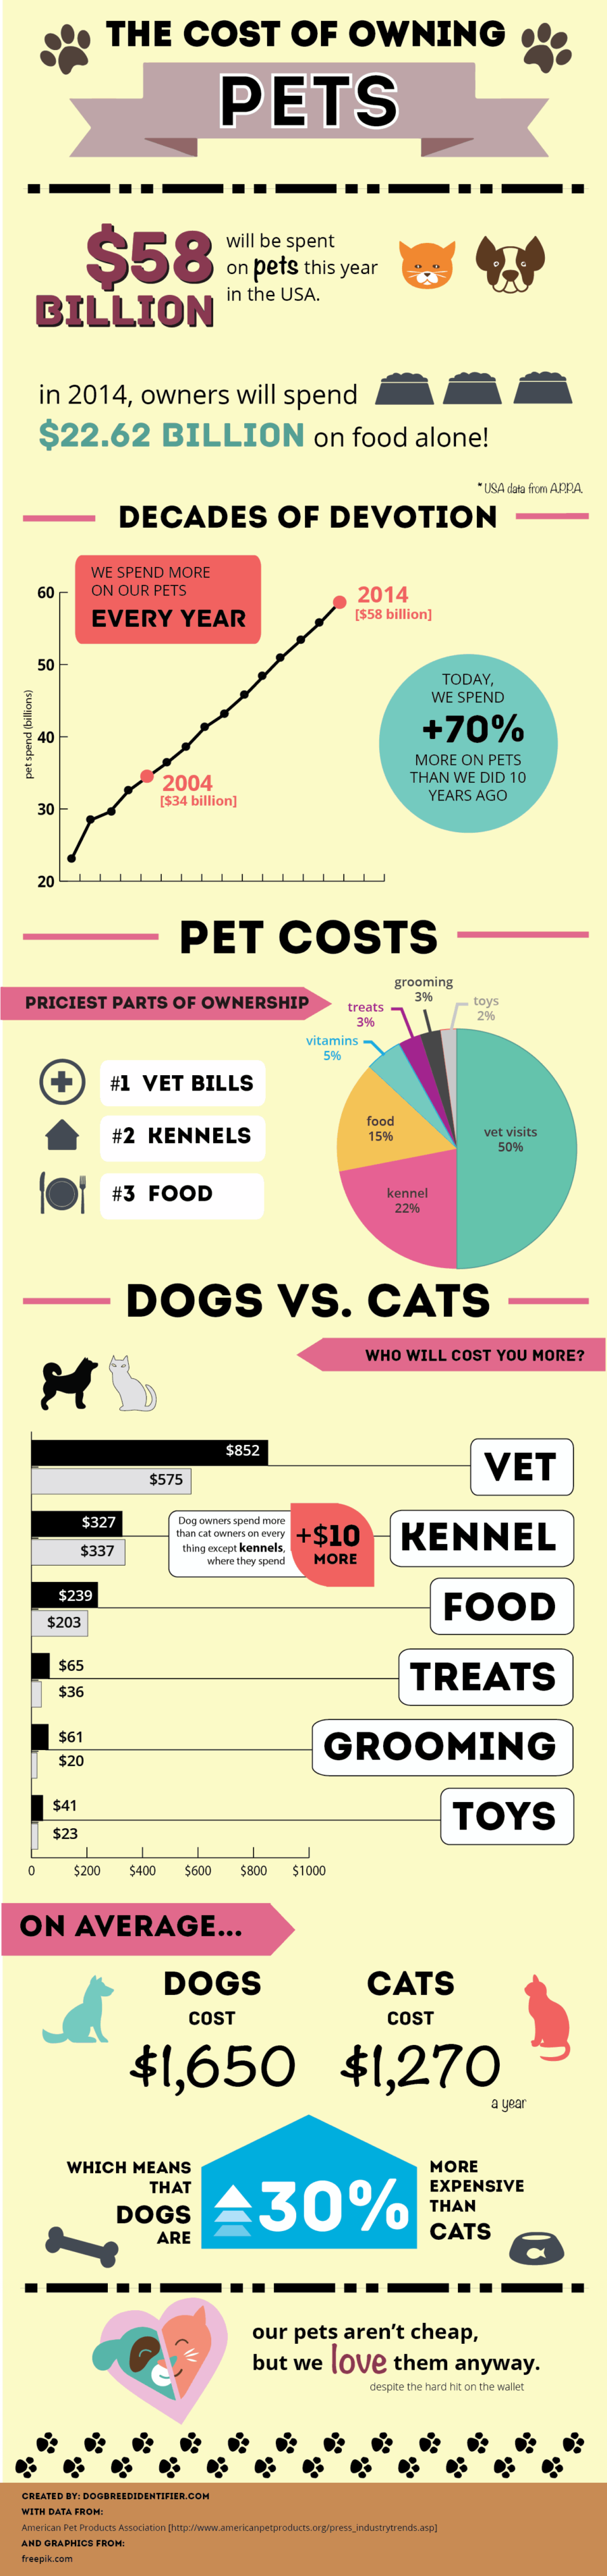 cost-of-pet-ownership-infographic